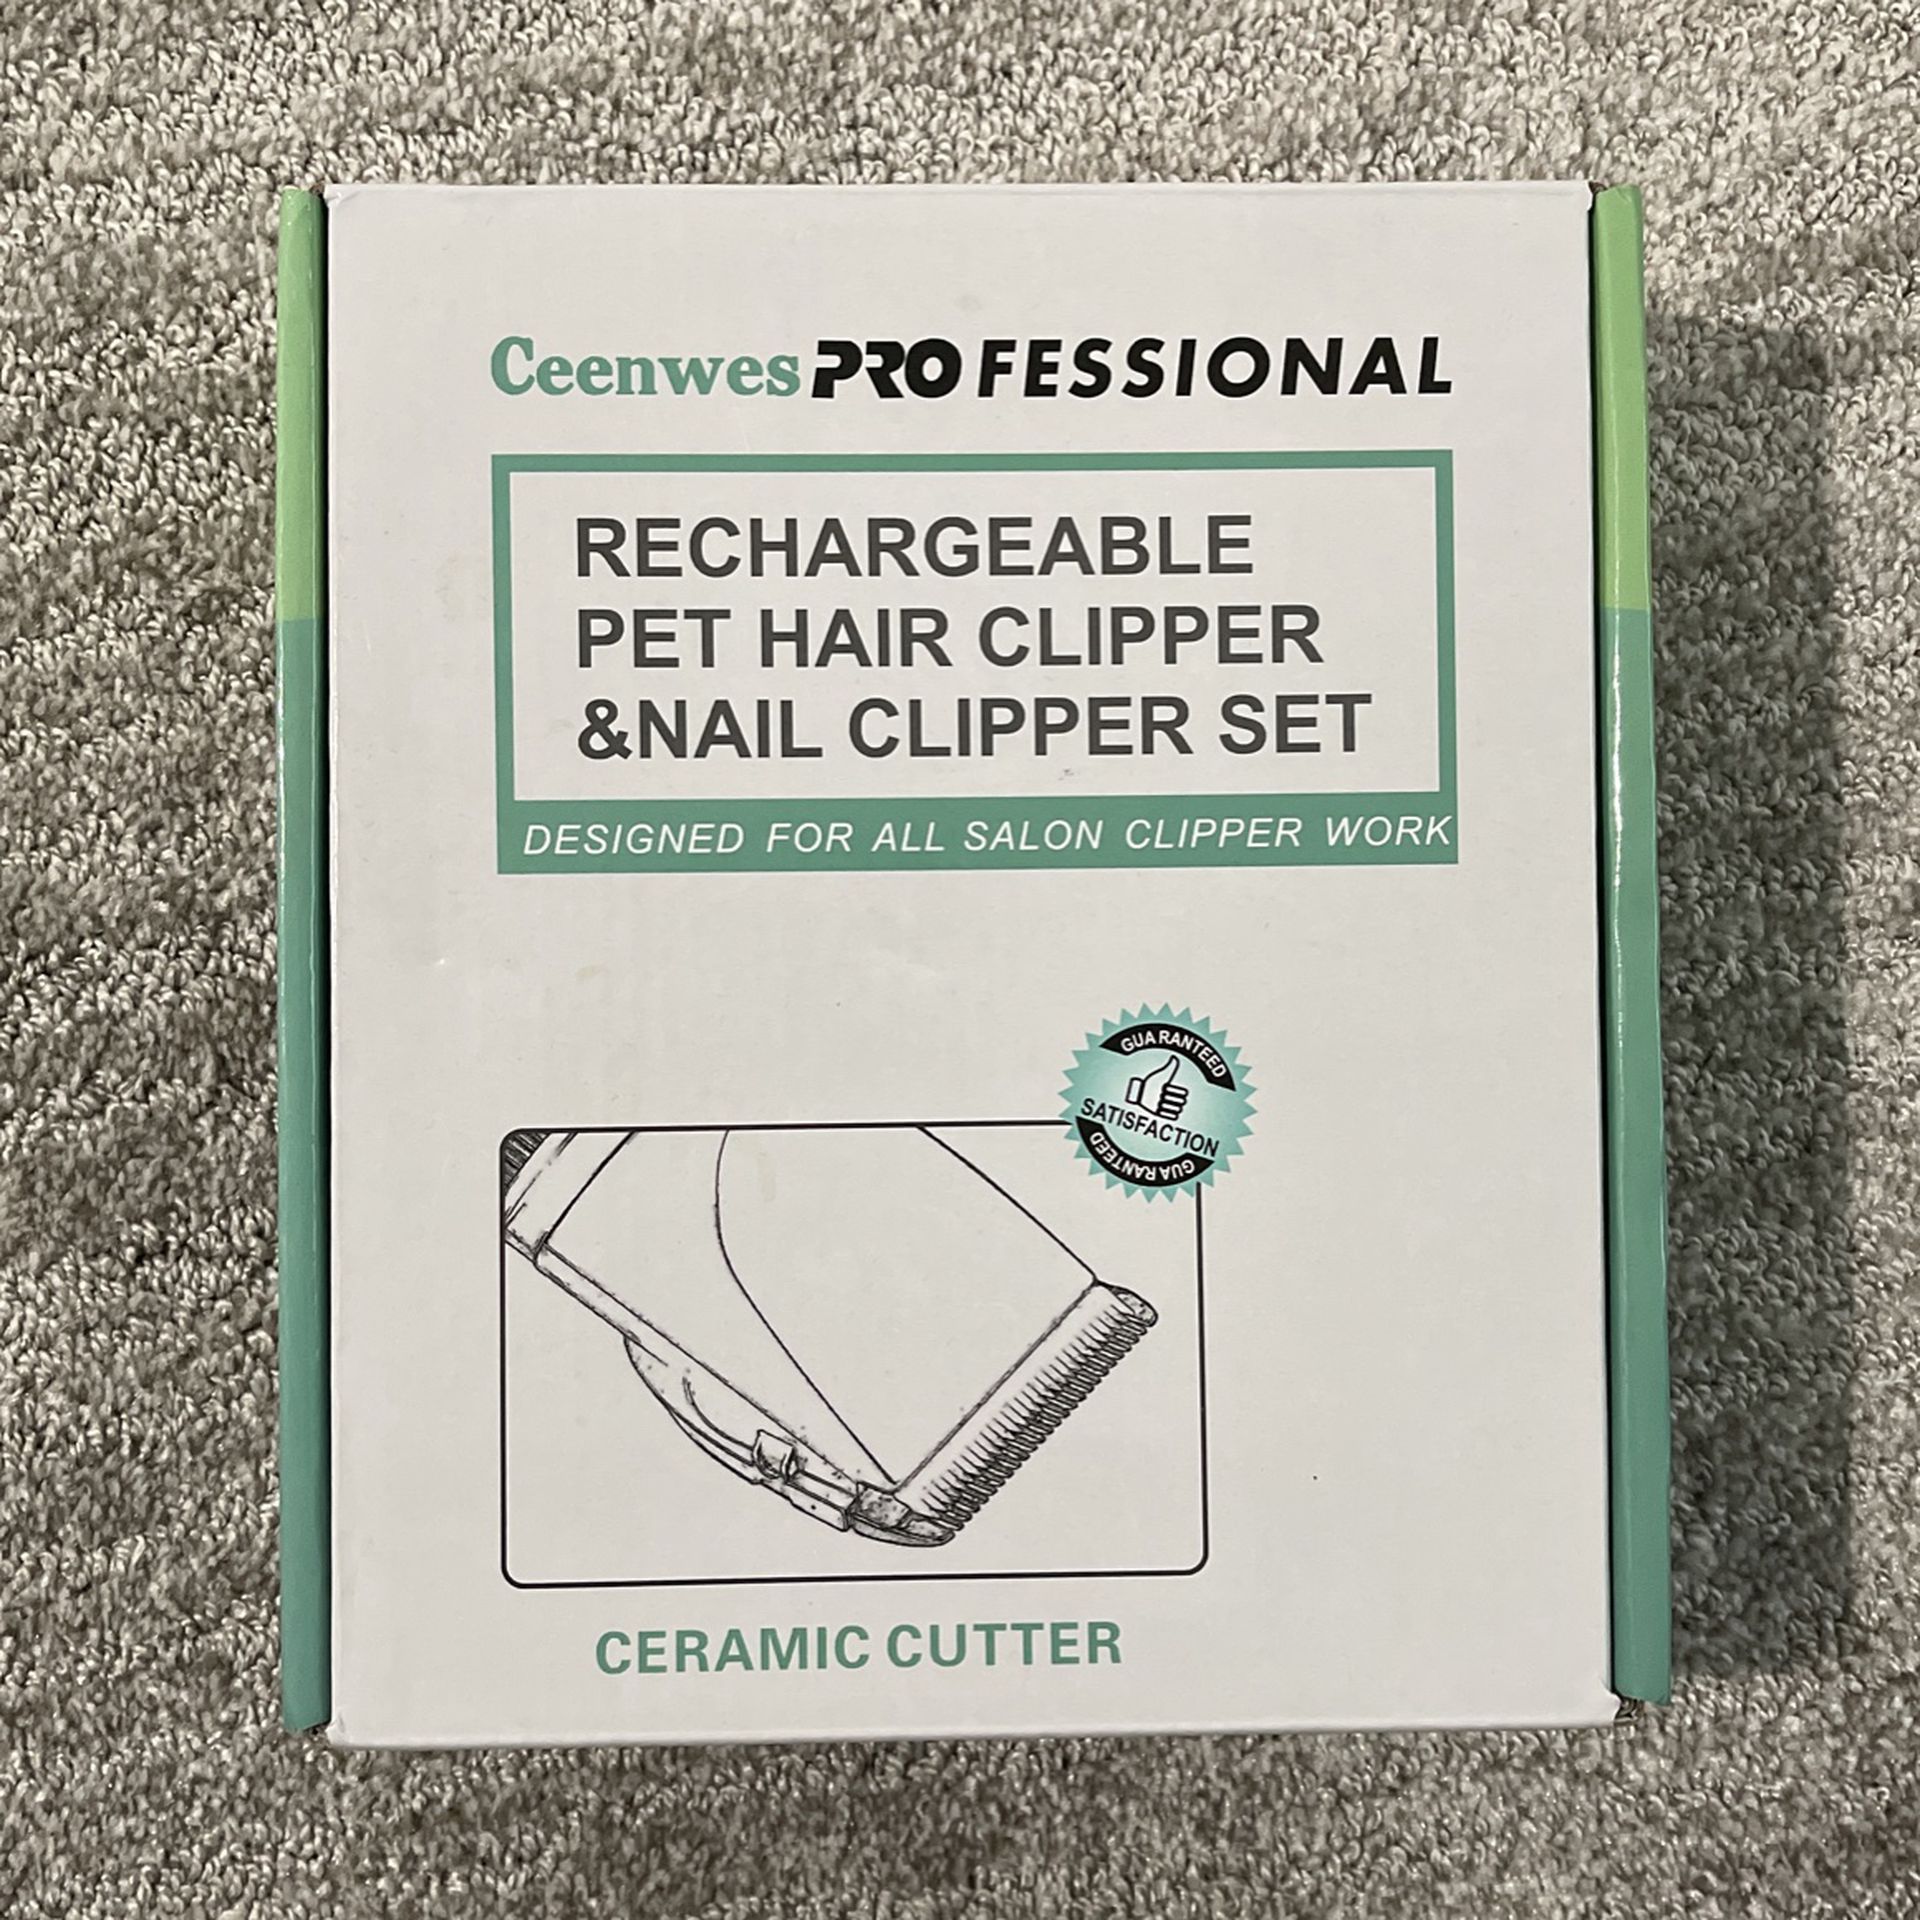 Ceenwes Professional Pet Hair & Nail Clipper Set